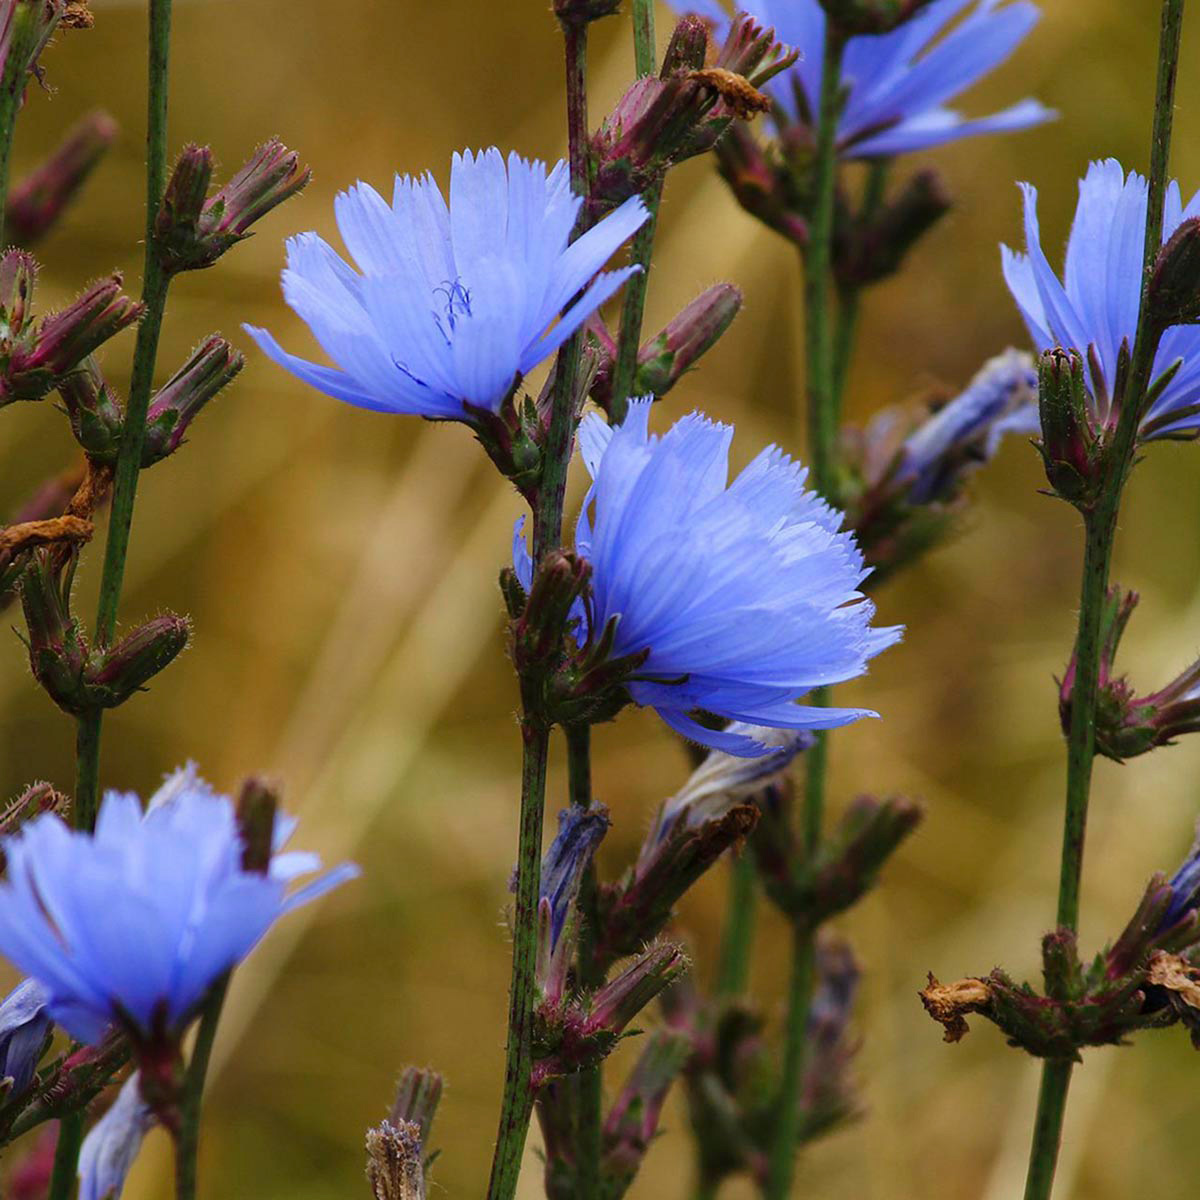 Pale blue chicory flowers on woody stems